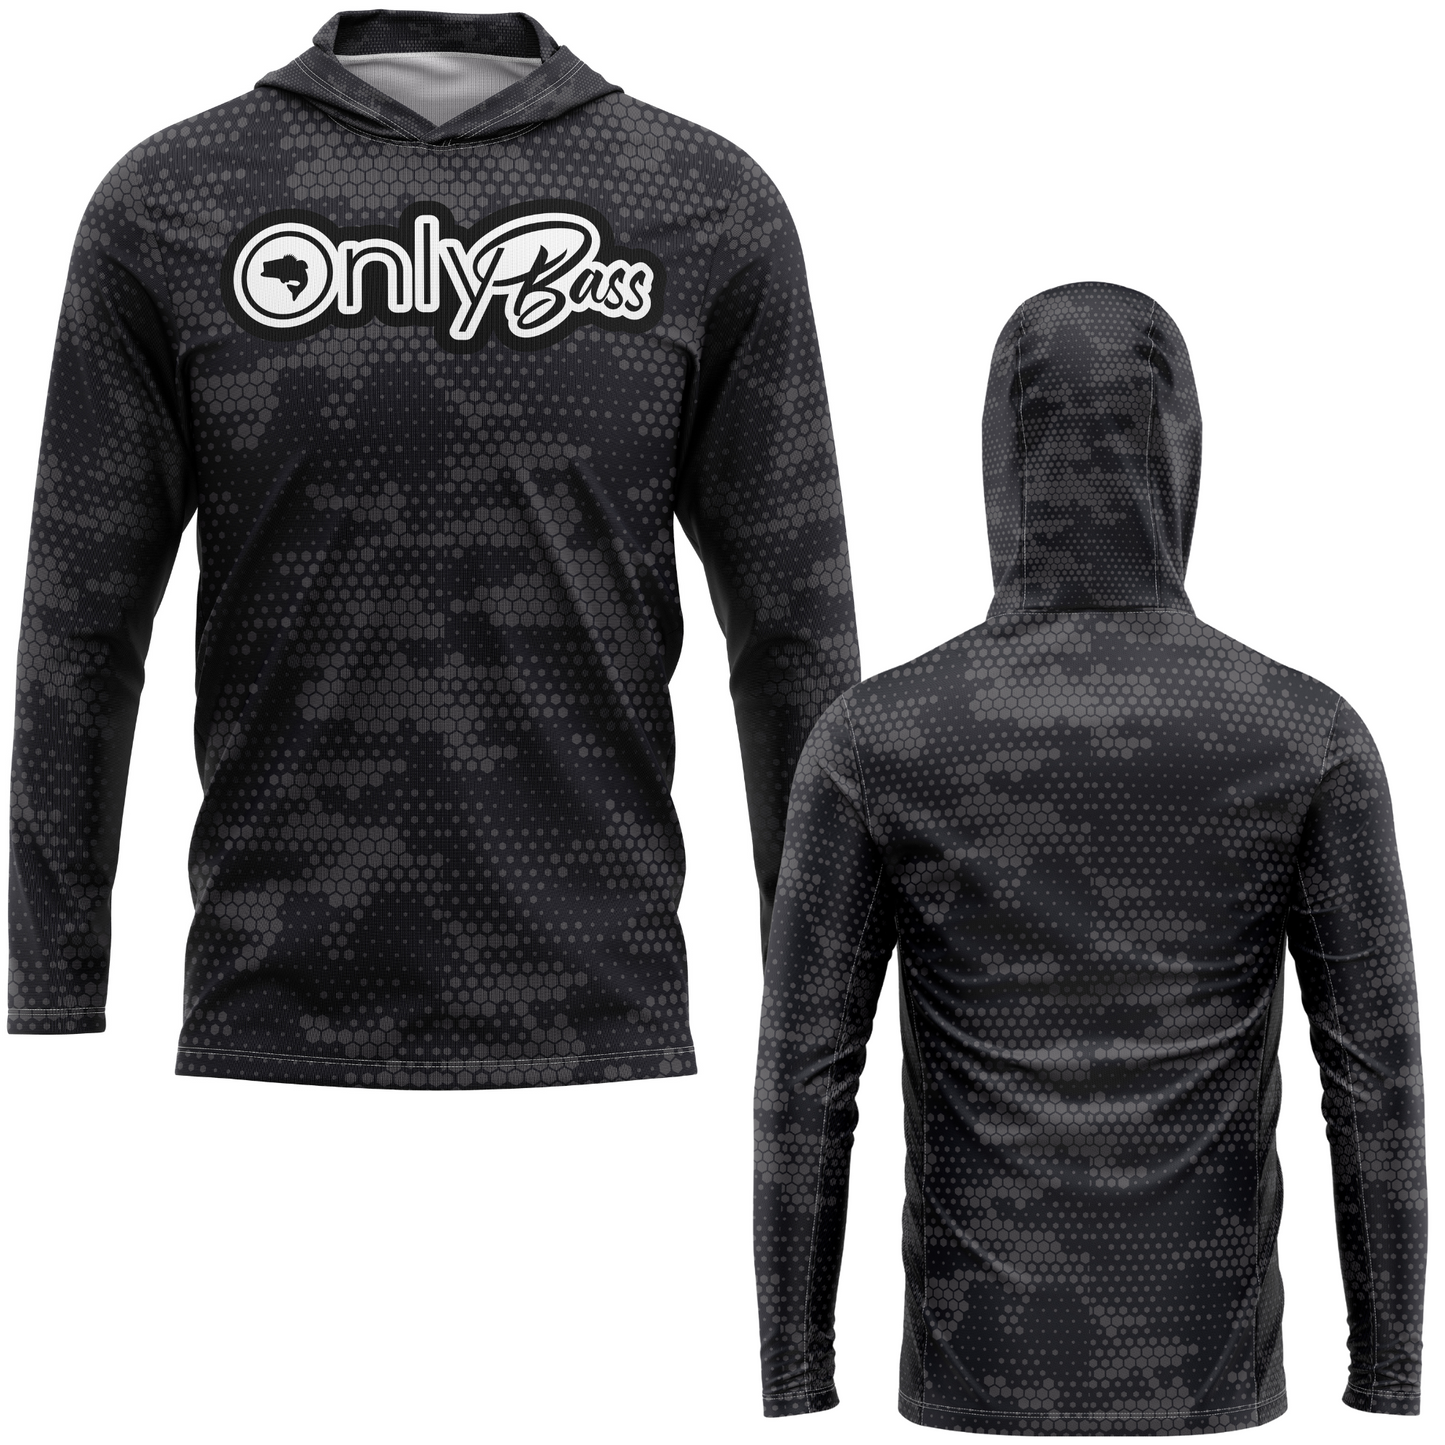 Only Bass SPF50 Performance Hoodie